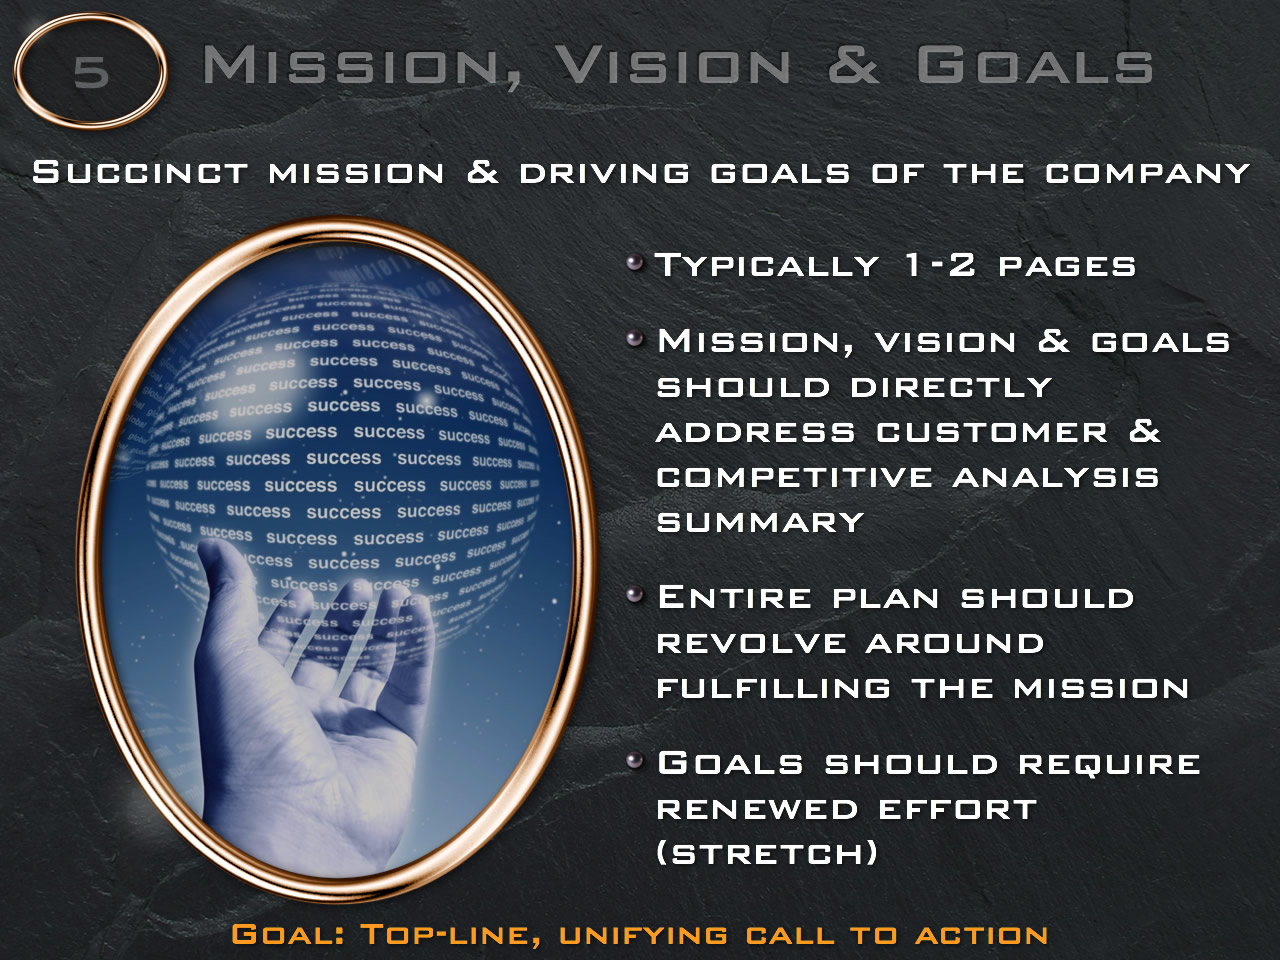 Casting the mission, vision and top-tier goals of a business plan